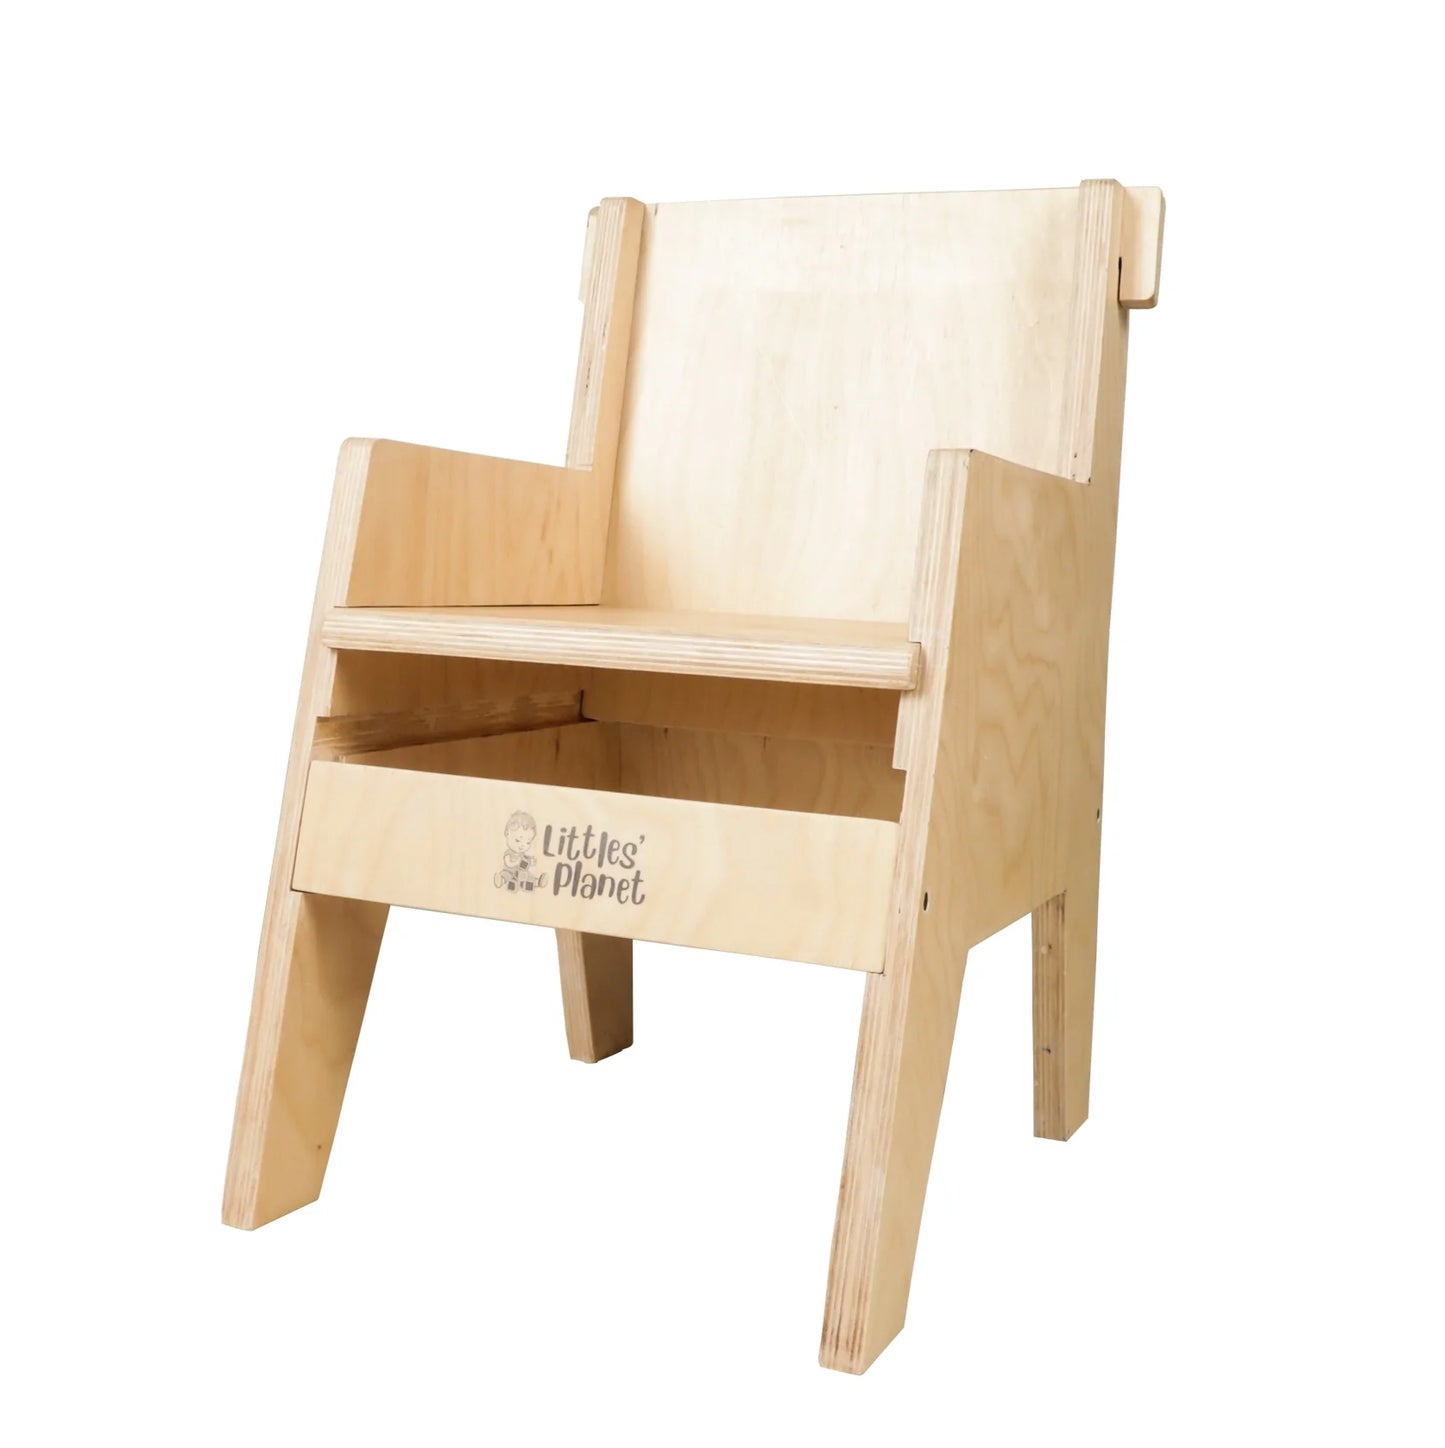 Buy Littles' Planet Montessori Wooden Table and Chair - Chair Position 2 - SkilloToys.com